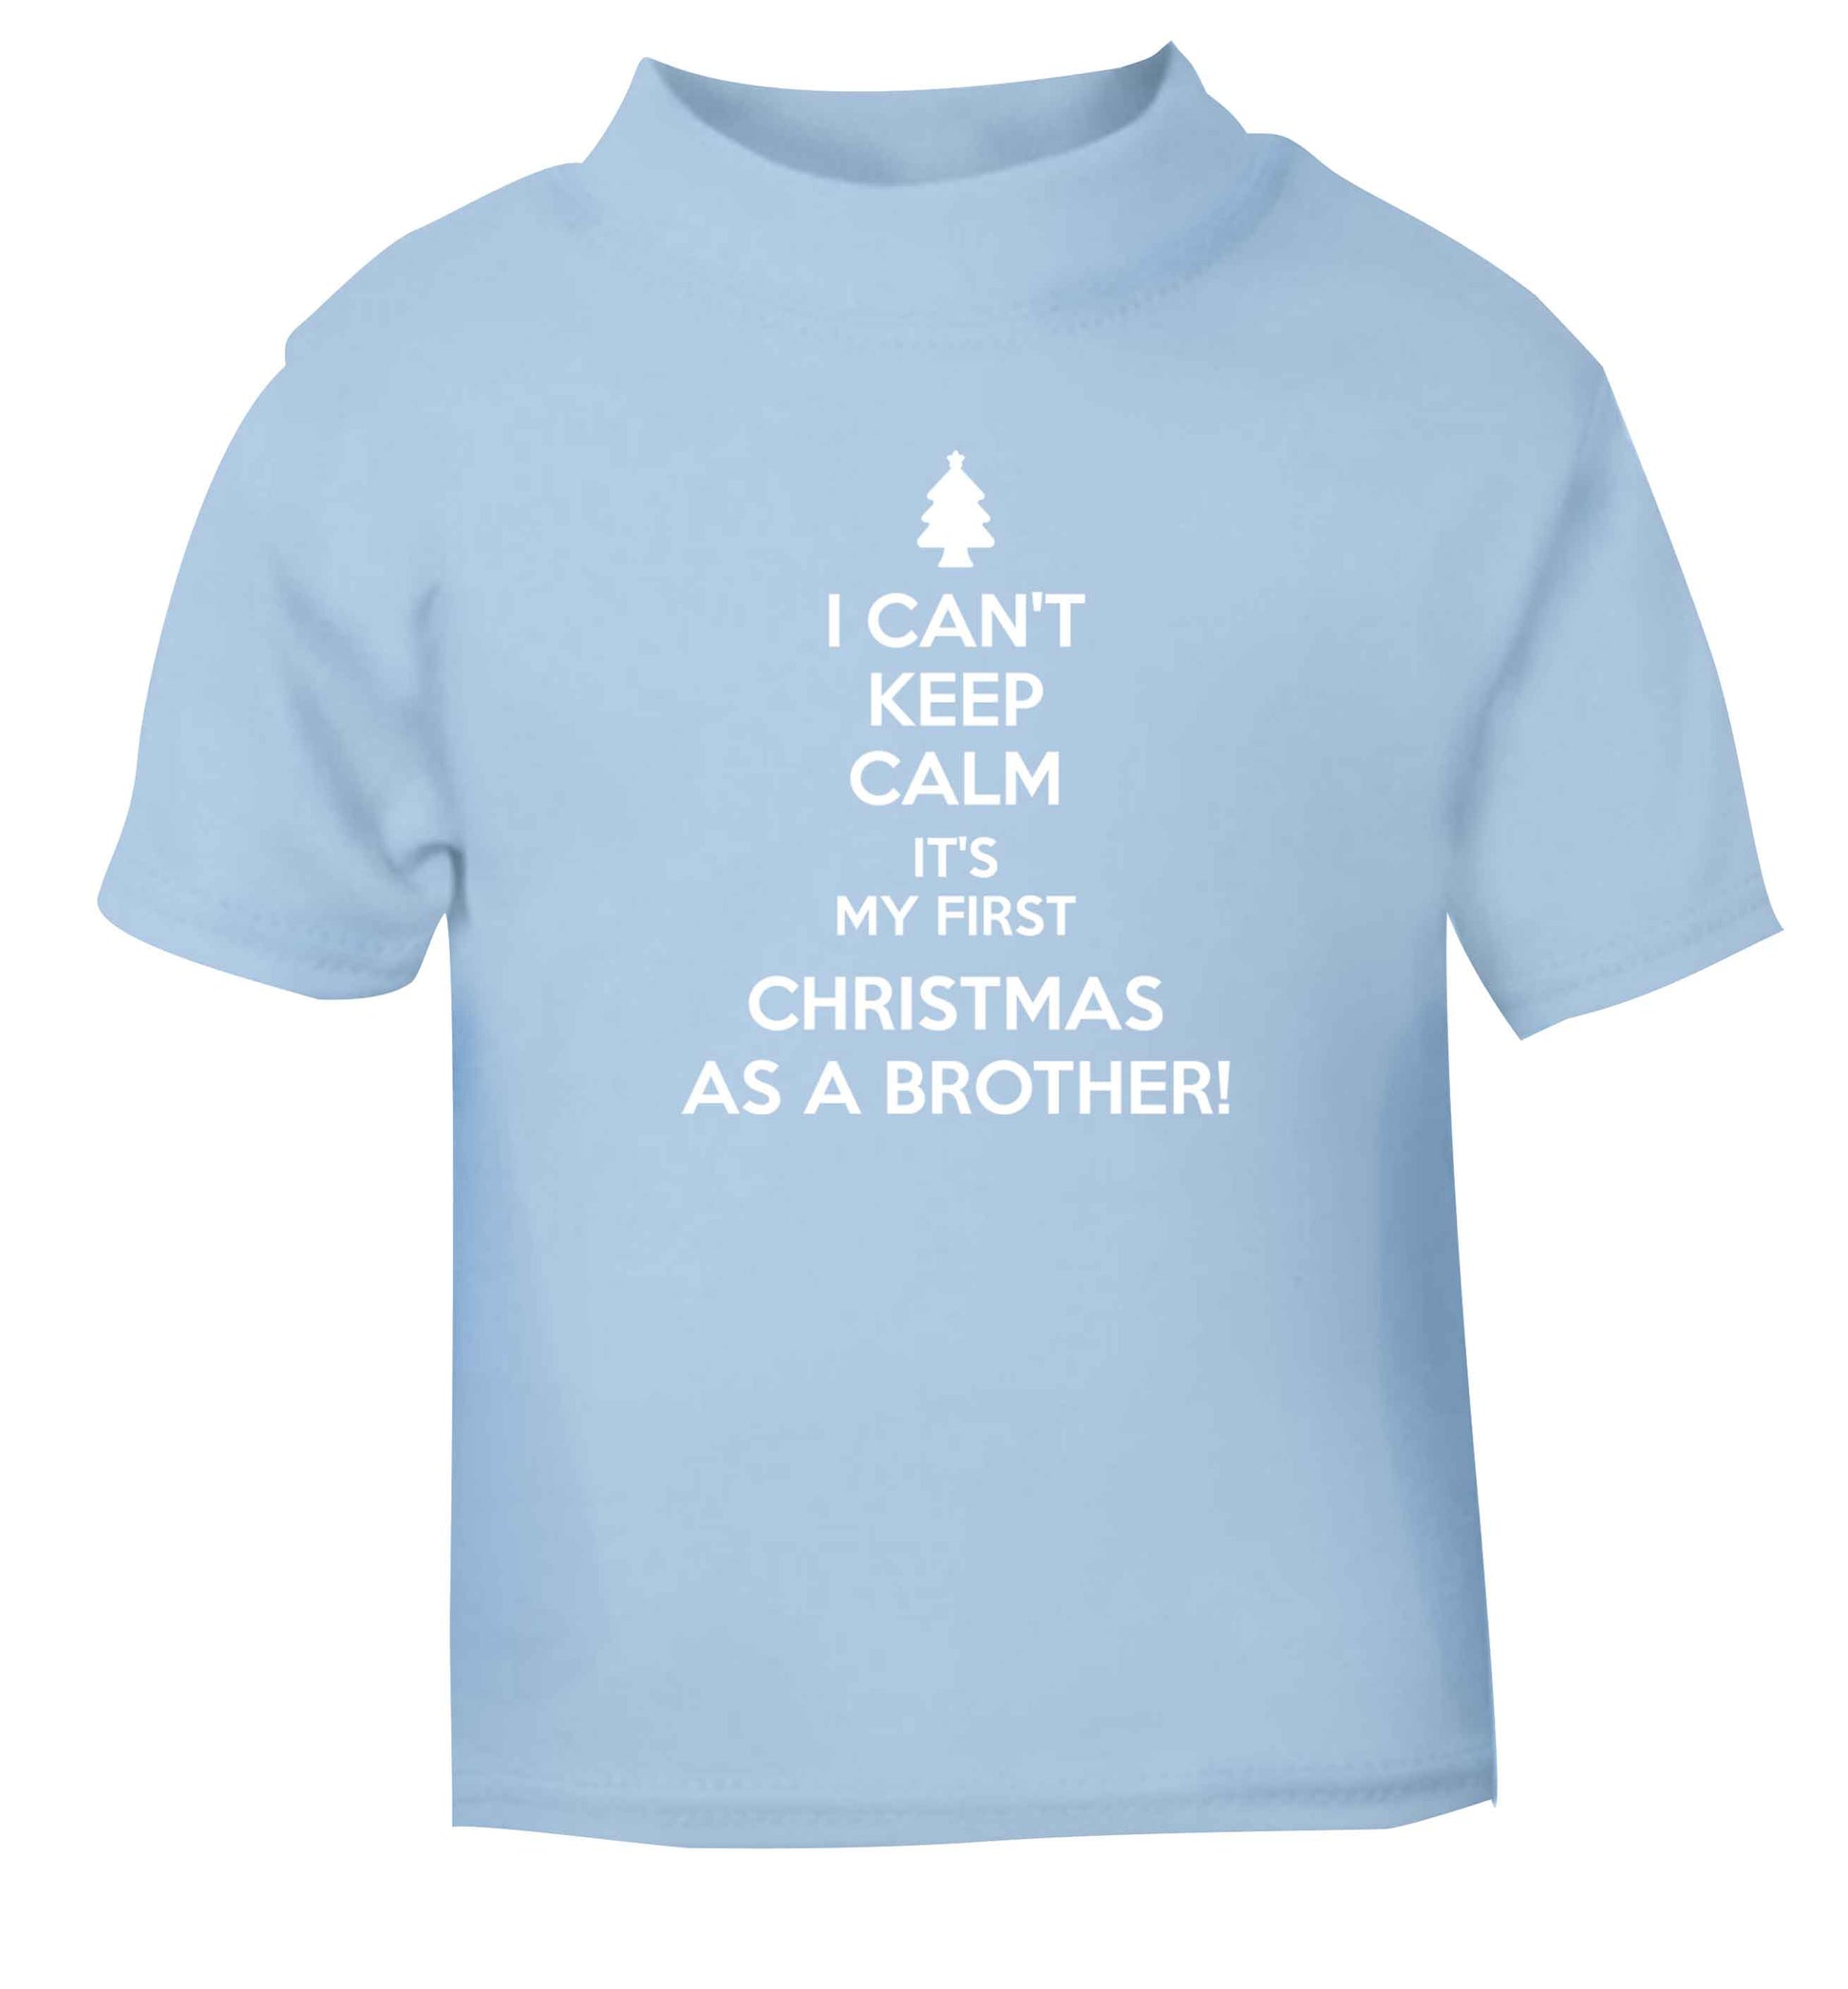 I can't keep calm it's my first Christmas as a brother! light blue Baby Toddler Tshirt 2 Years